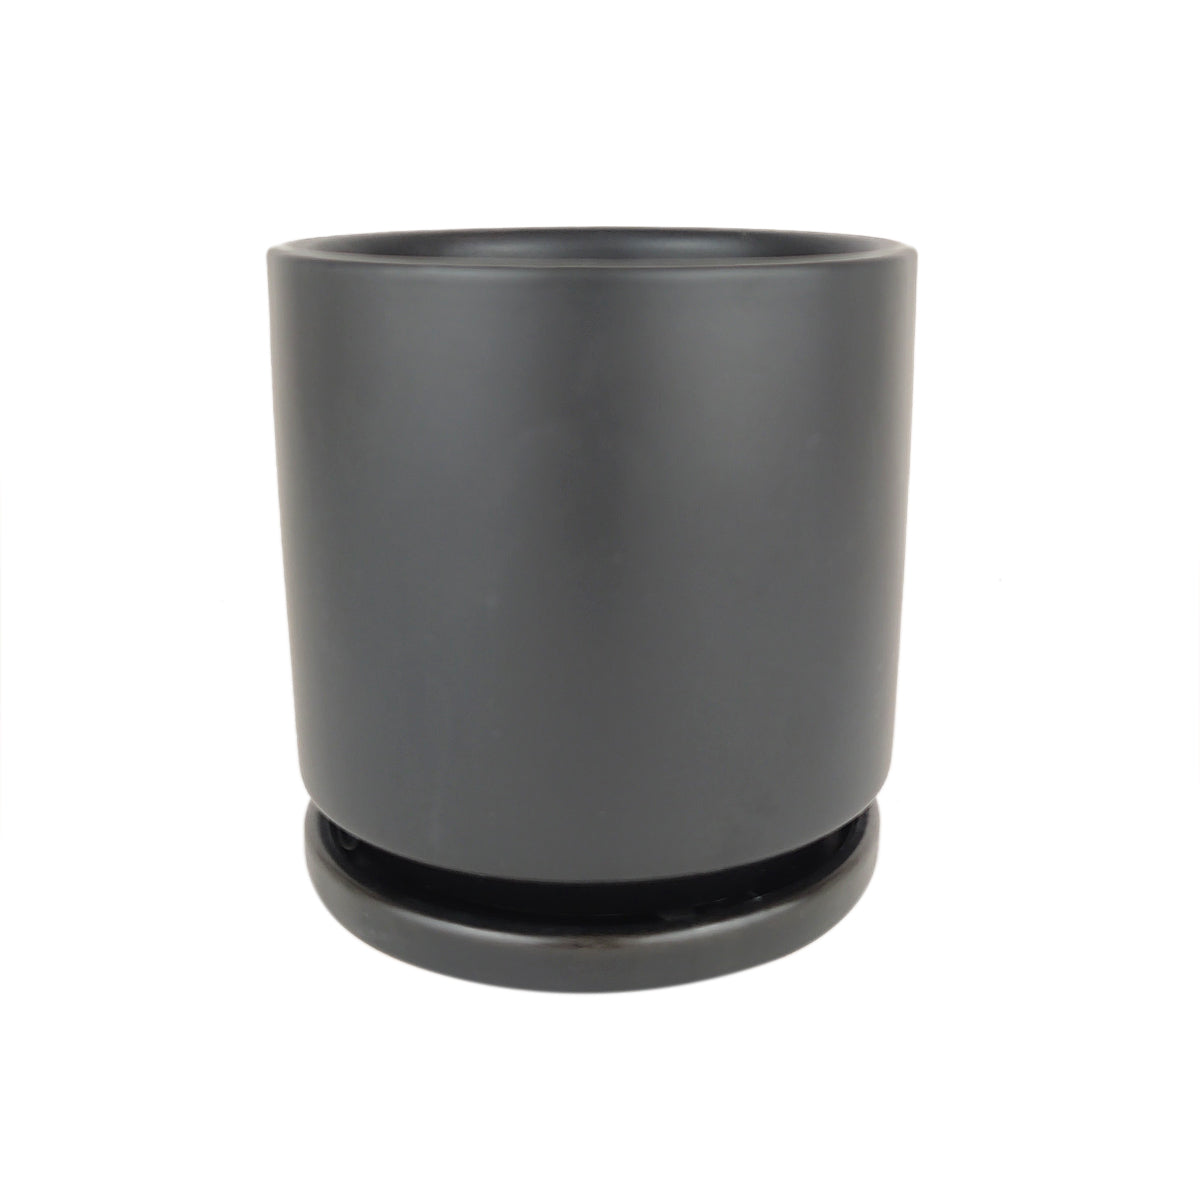 4 inch Black porcelain cylinder pot, pot with drainage hole and saucer for houseplants, the best pot for small and medium houseplants and succulents